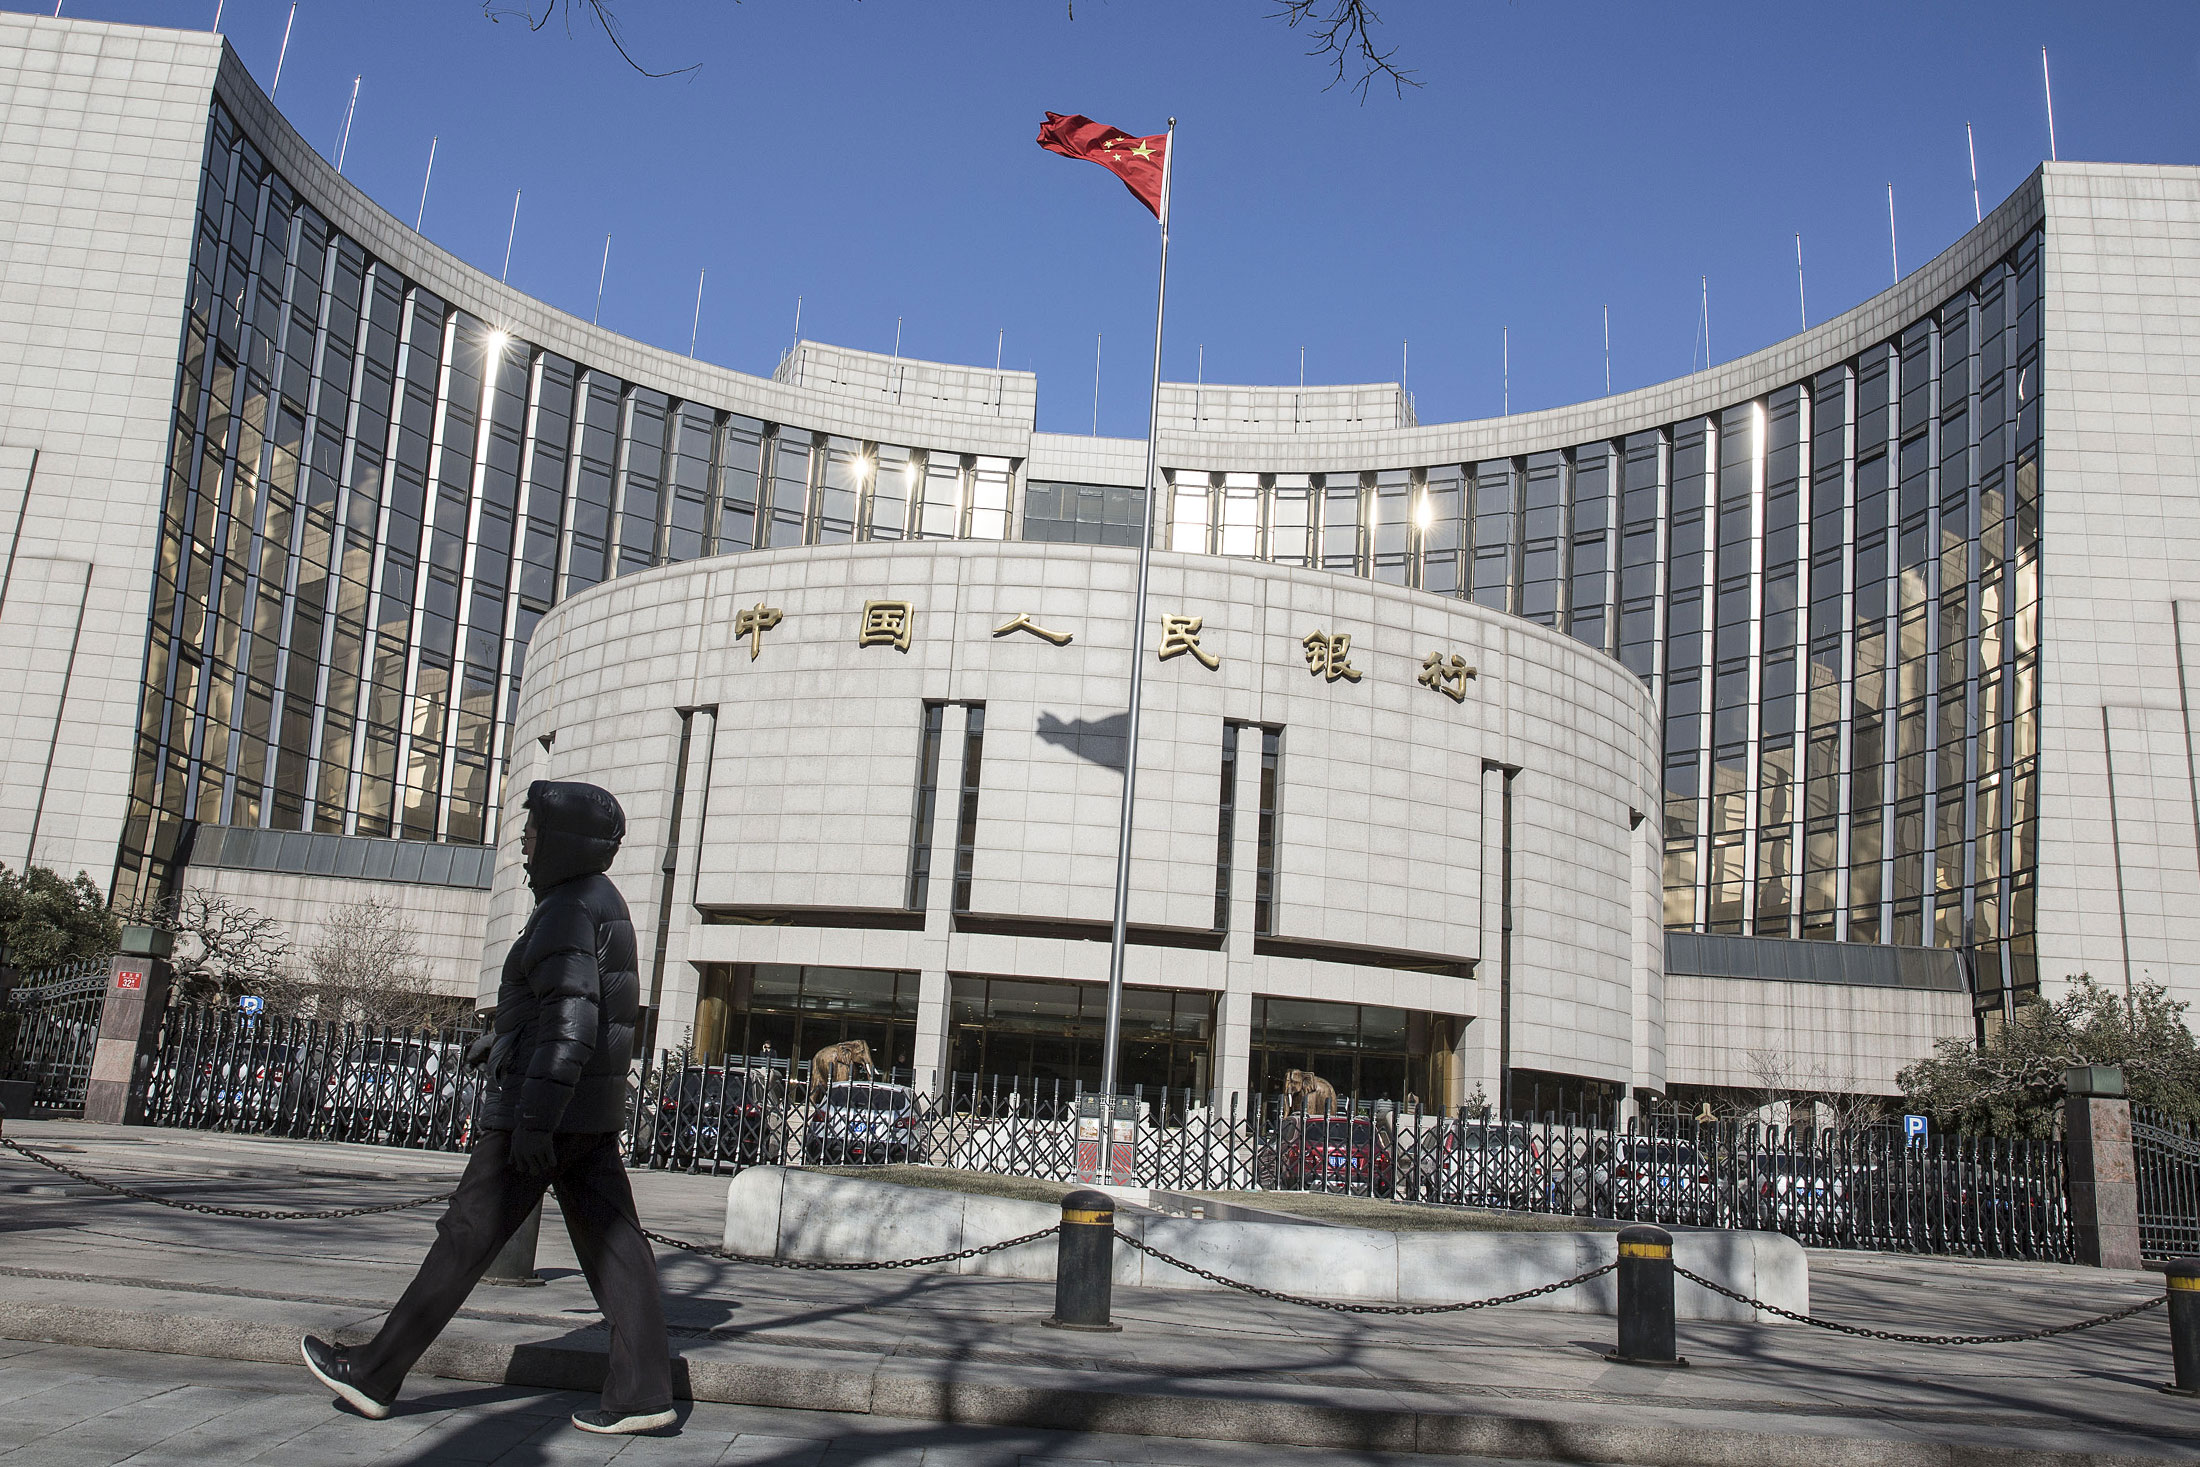 A pedestrian walks past the People's Bank of China (PBOC) headquarters in Beijing, China, on Monday, Jan. 18, 2016. China's economy slowed in December, capping the weakest quarter of growth since the 2009 global recession, as the Communist leadership struggles to manage a transition to consumer-led expansion.
